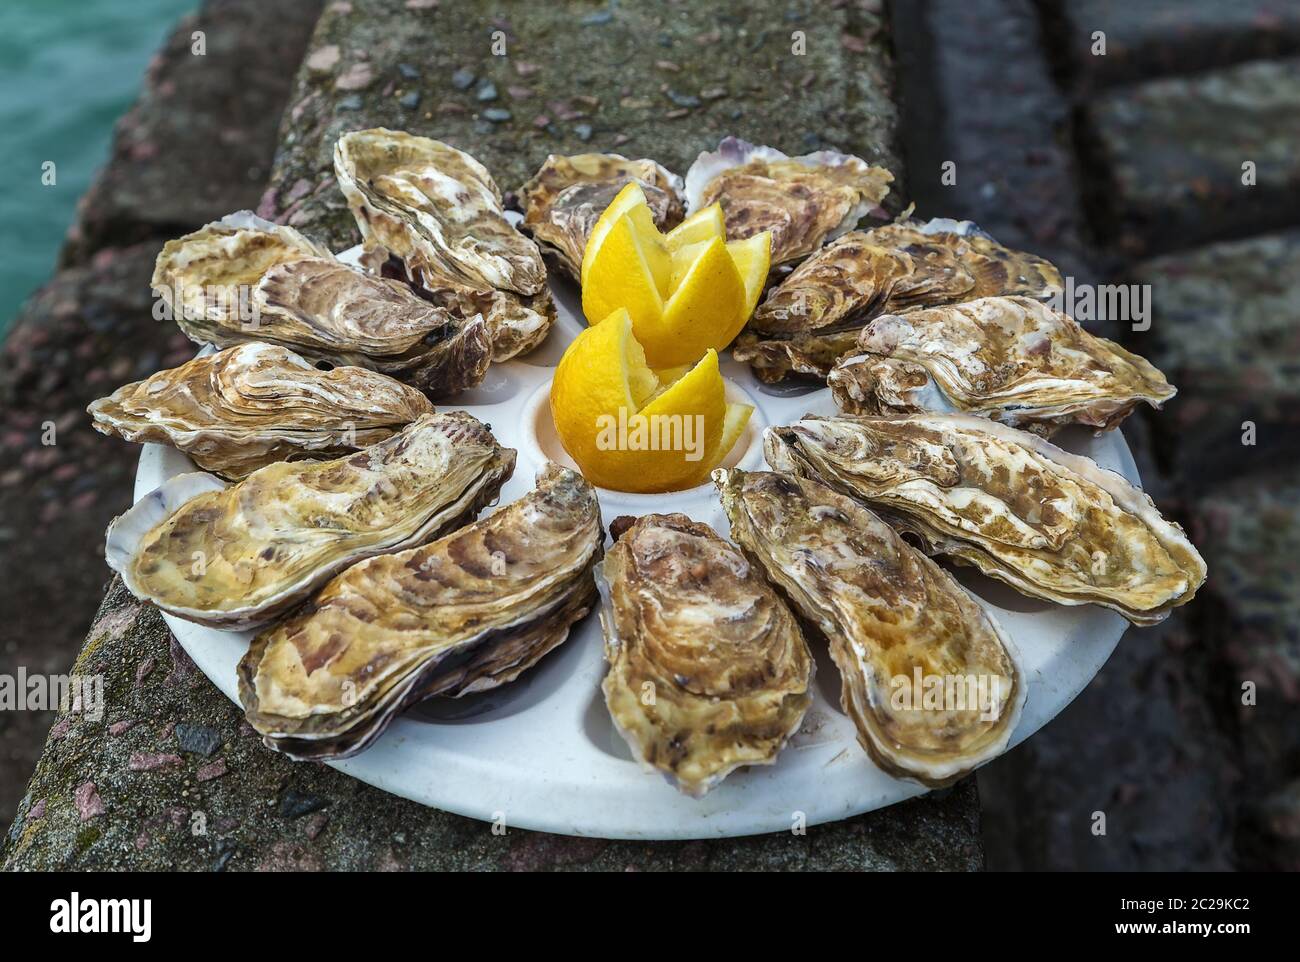 Plate with dozen oysters Stock Photo